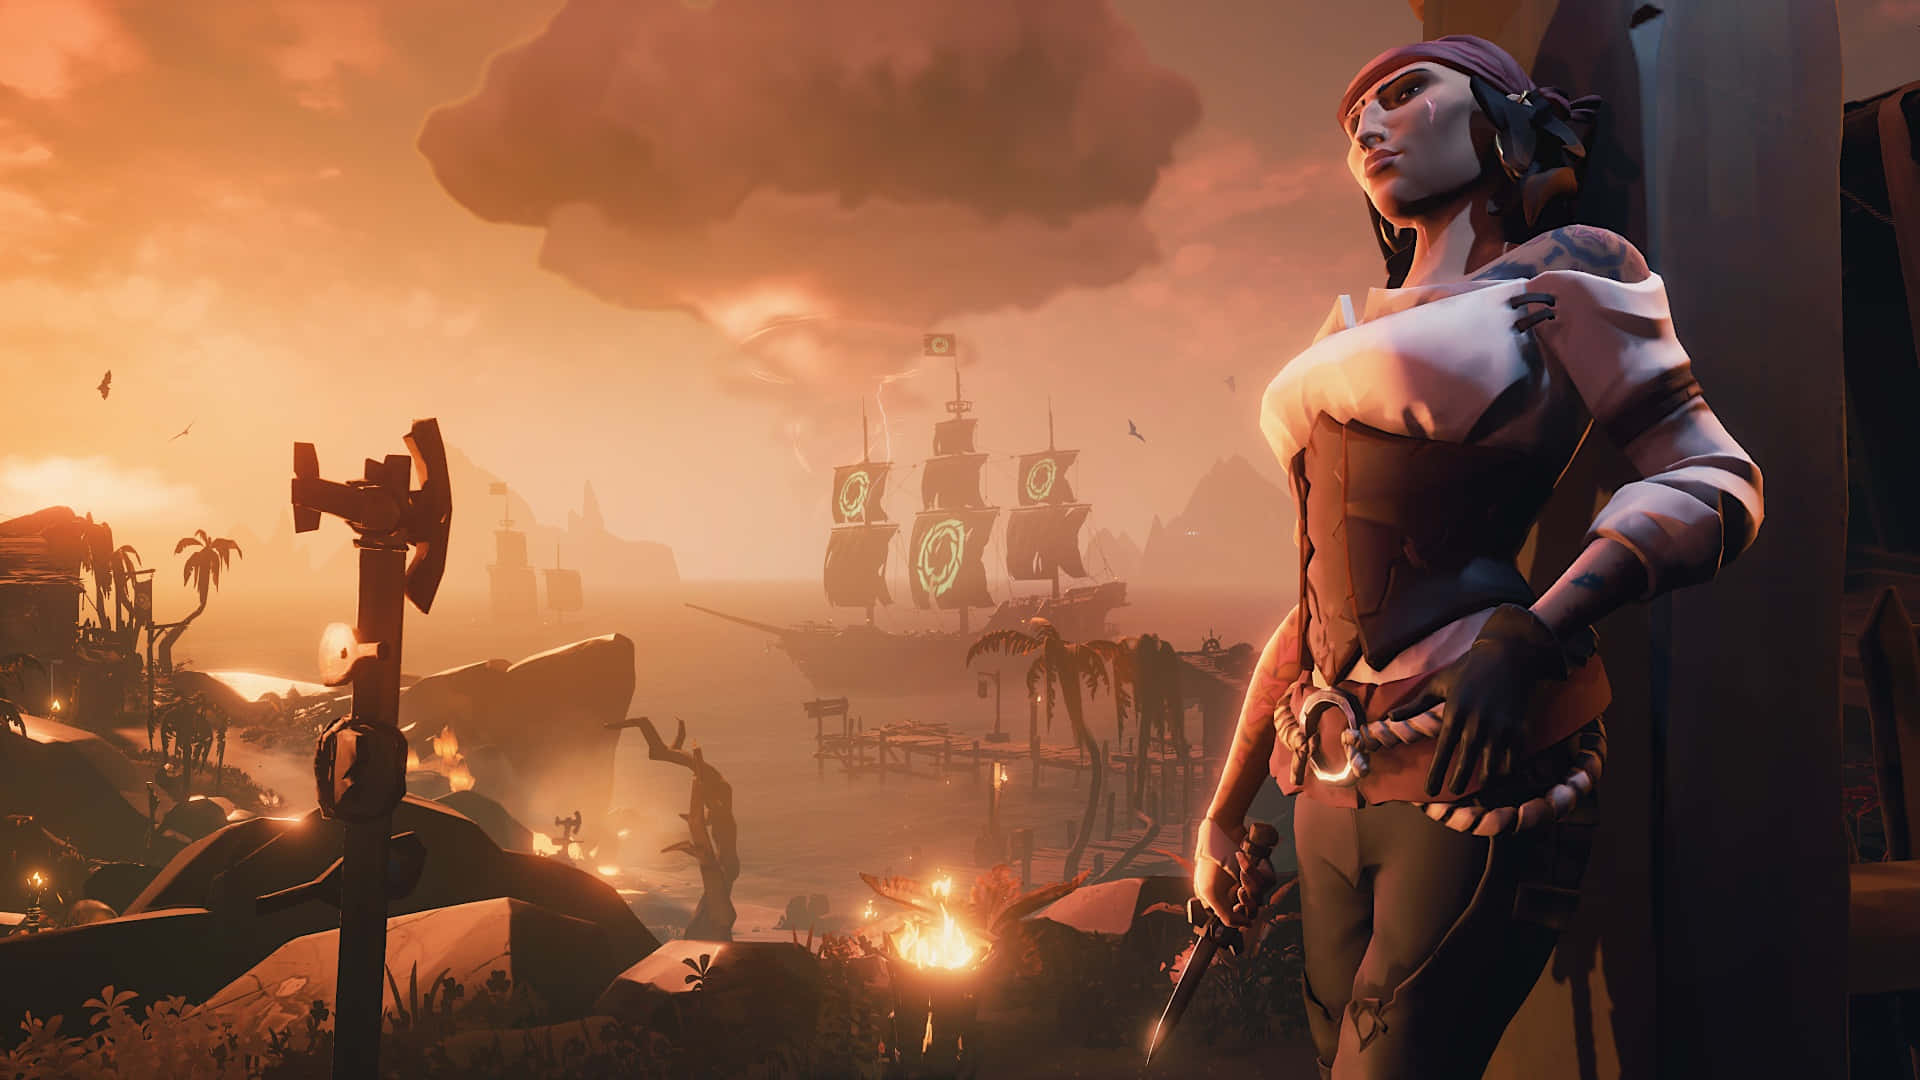 A thrilling pirate adventure awaits in Sea Of Thieves